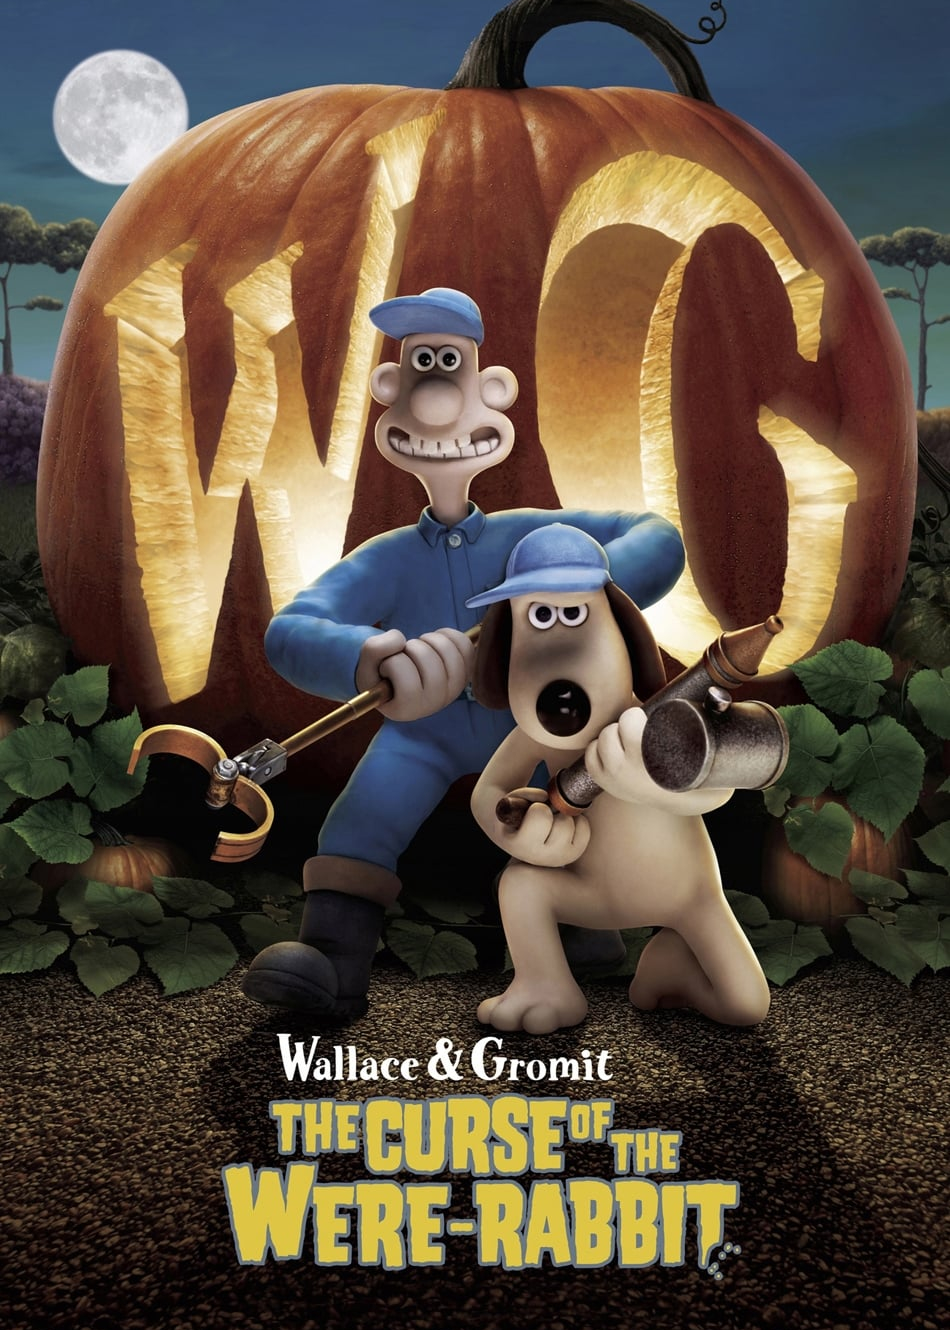 Xem Phim Wallace & Gromit: The Curse of the Were-Rabbit (Wallace & Gromit: The Curse of the Were-Rabbit)